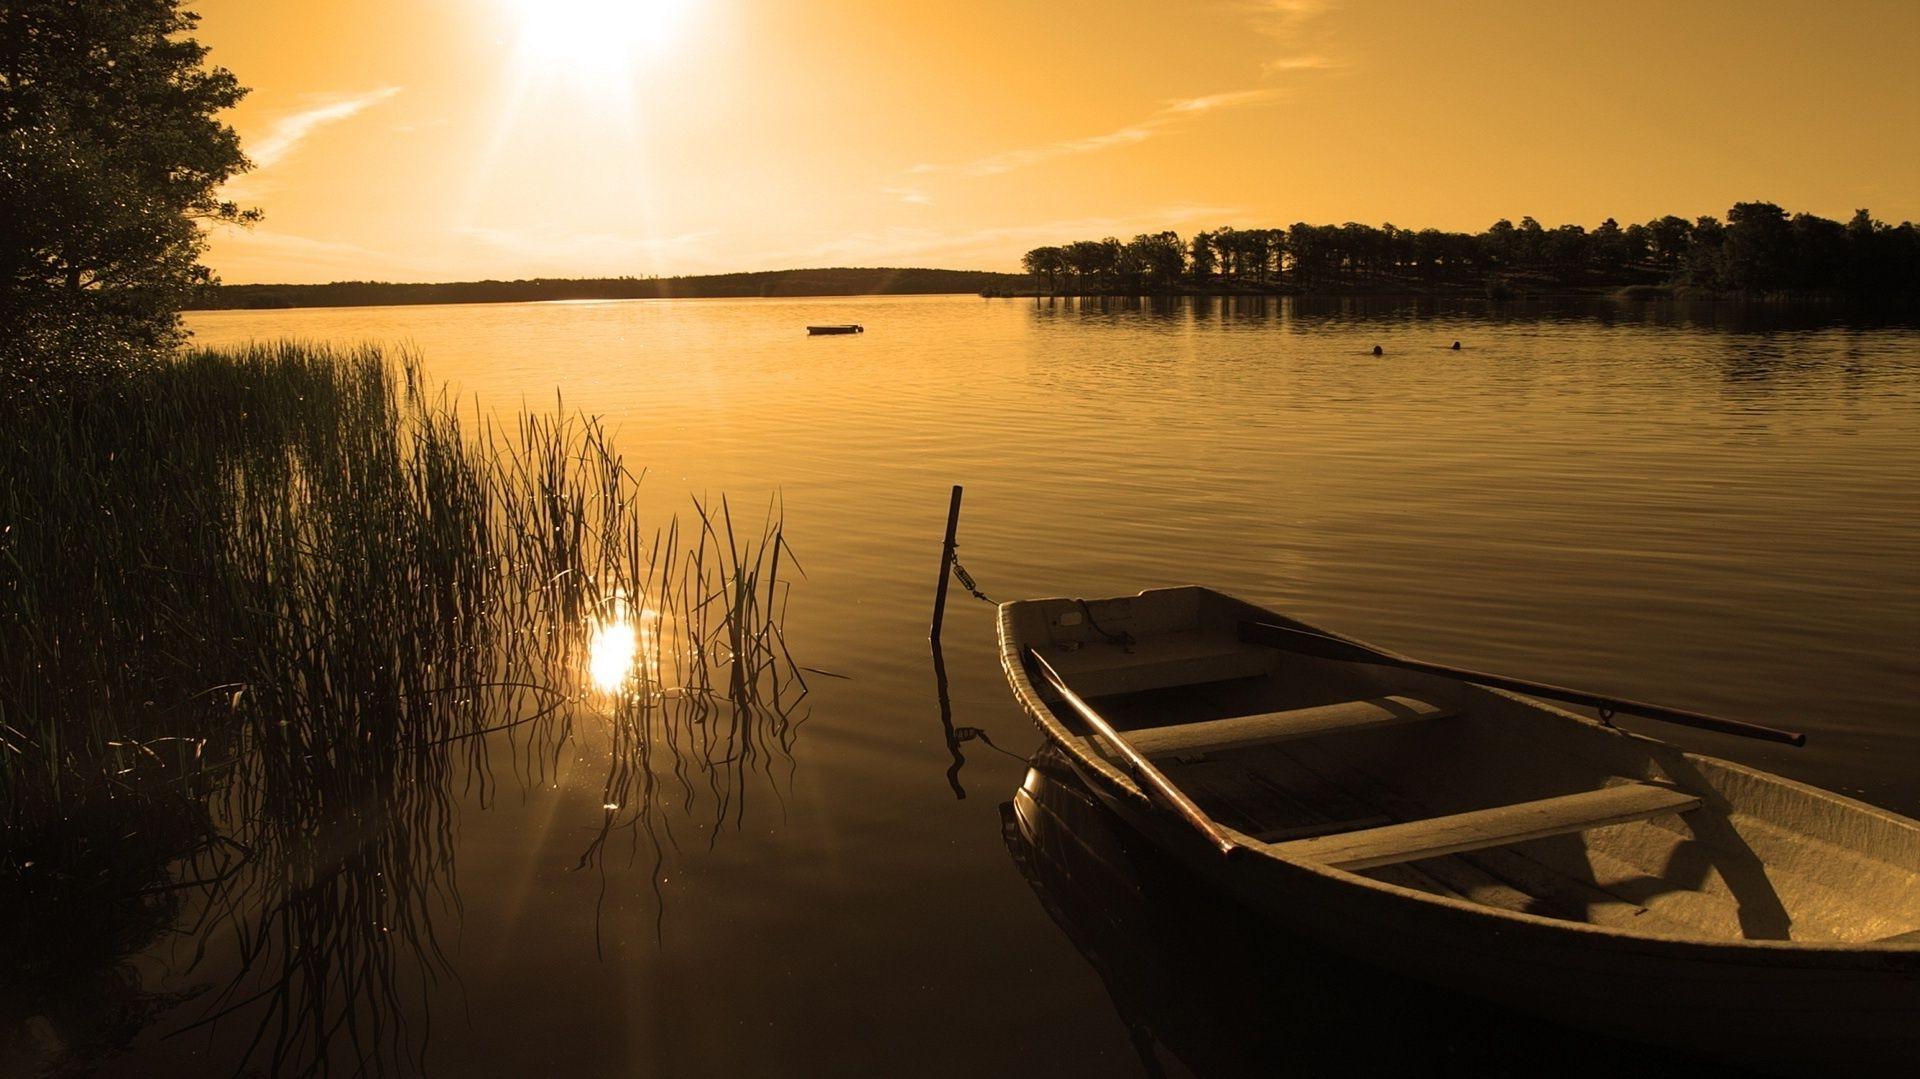 Rowing boat on the lake among the reeds. Android wallpaper for free